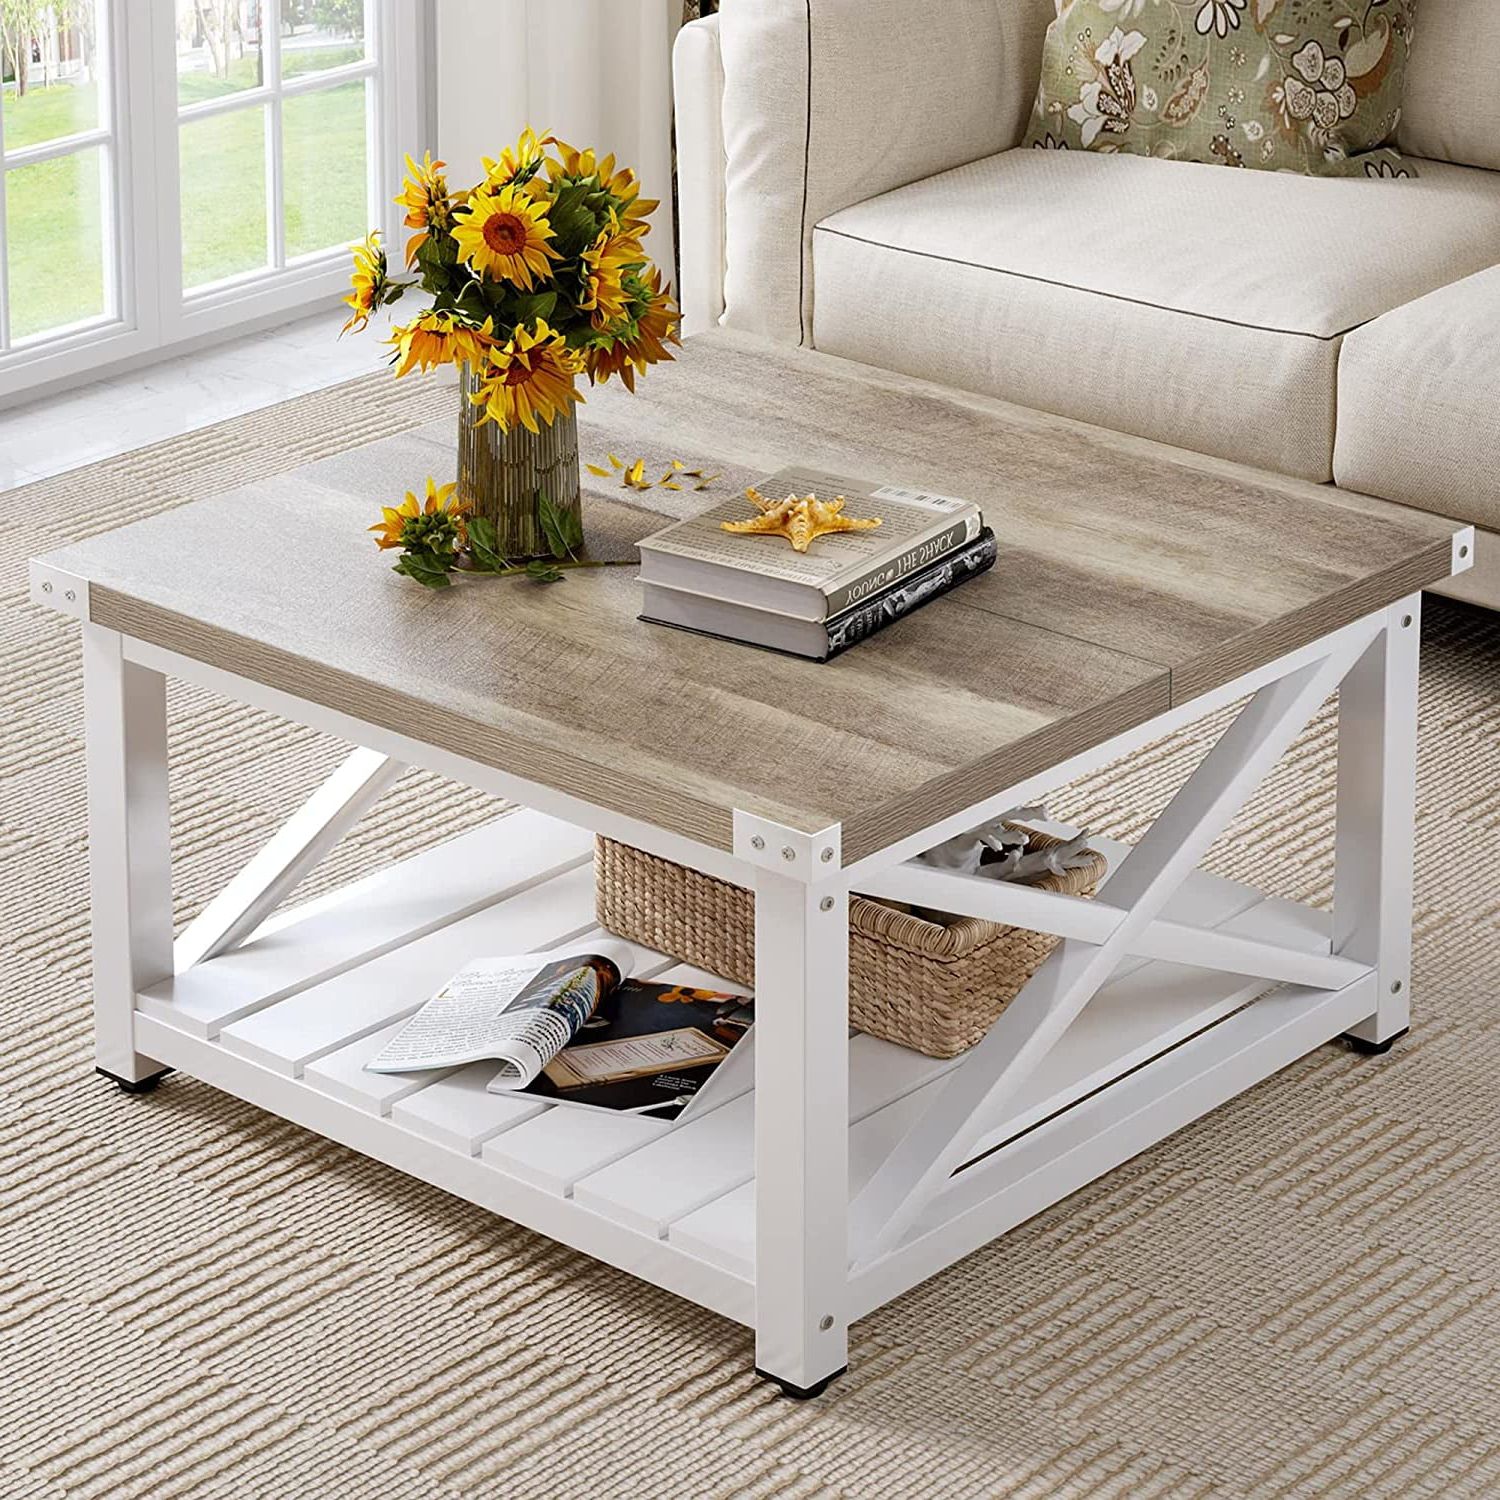 Trendy Living Room Farmhouse Coffee Tables With Dextrus Farmhouse Coffee Table For Living Room, Square Wood Coffee Table  With Open Storage Shelf – Walmart (Photo 2 of 10)